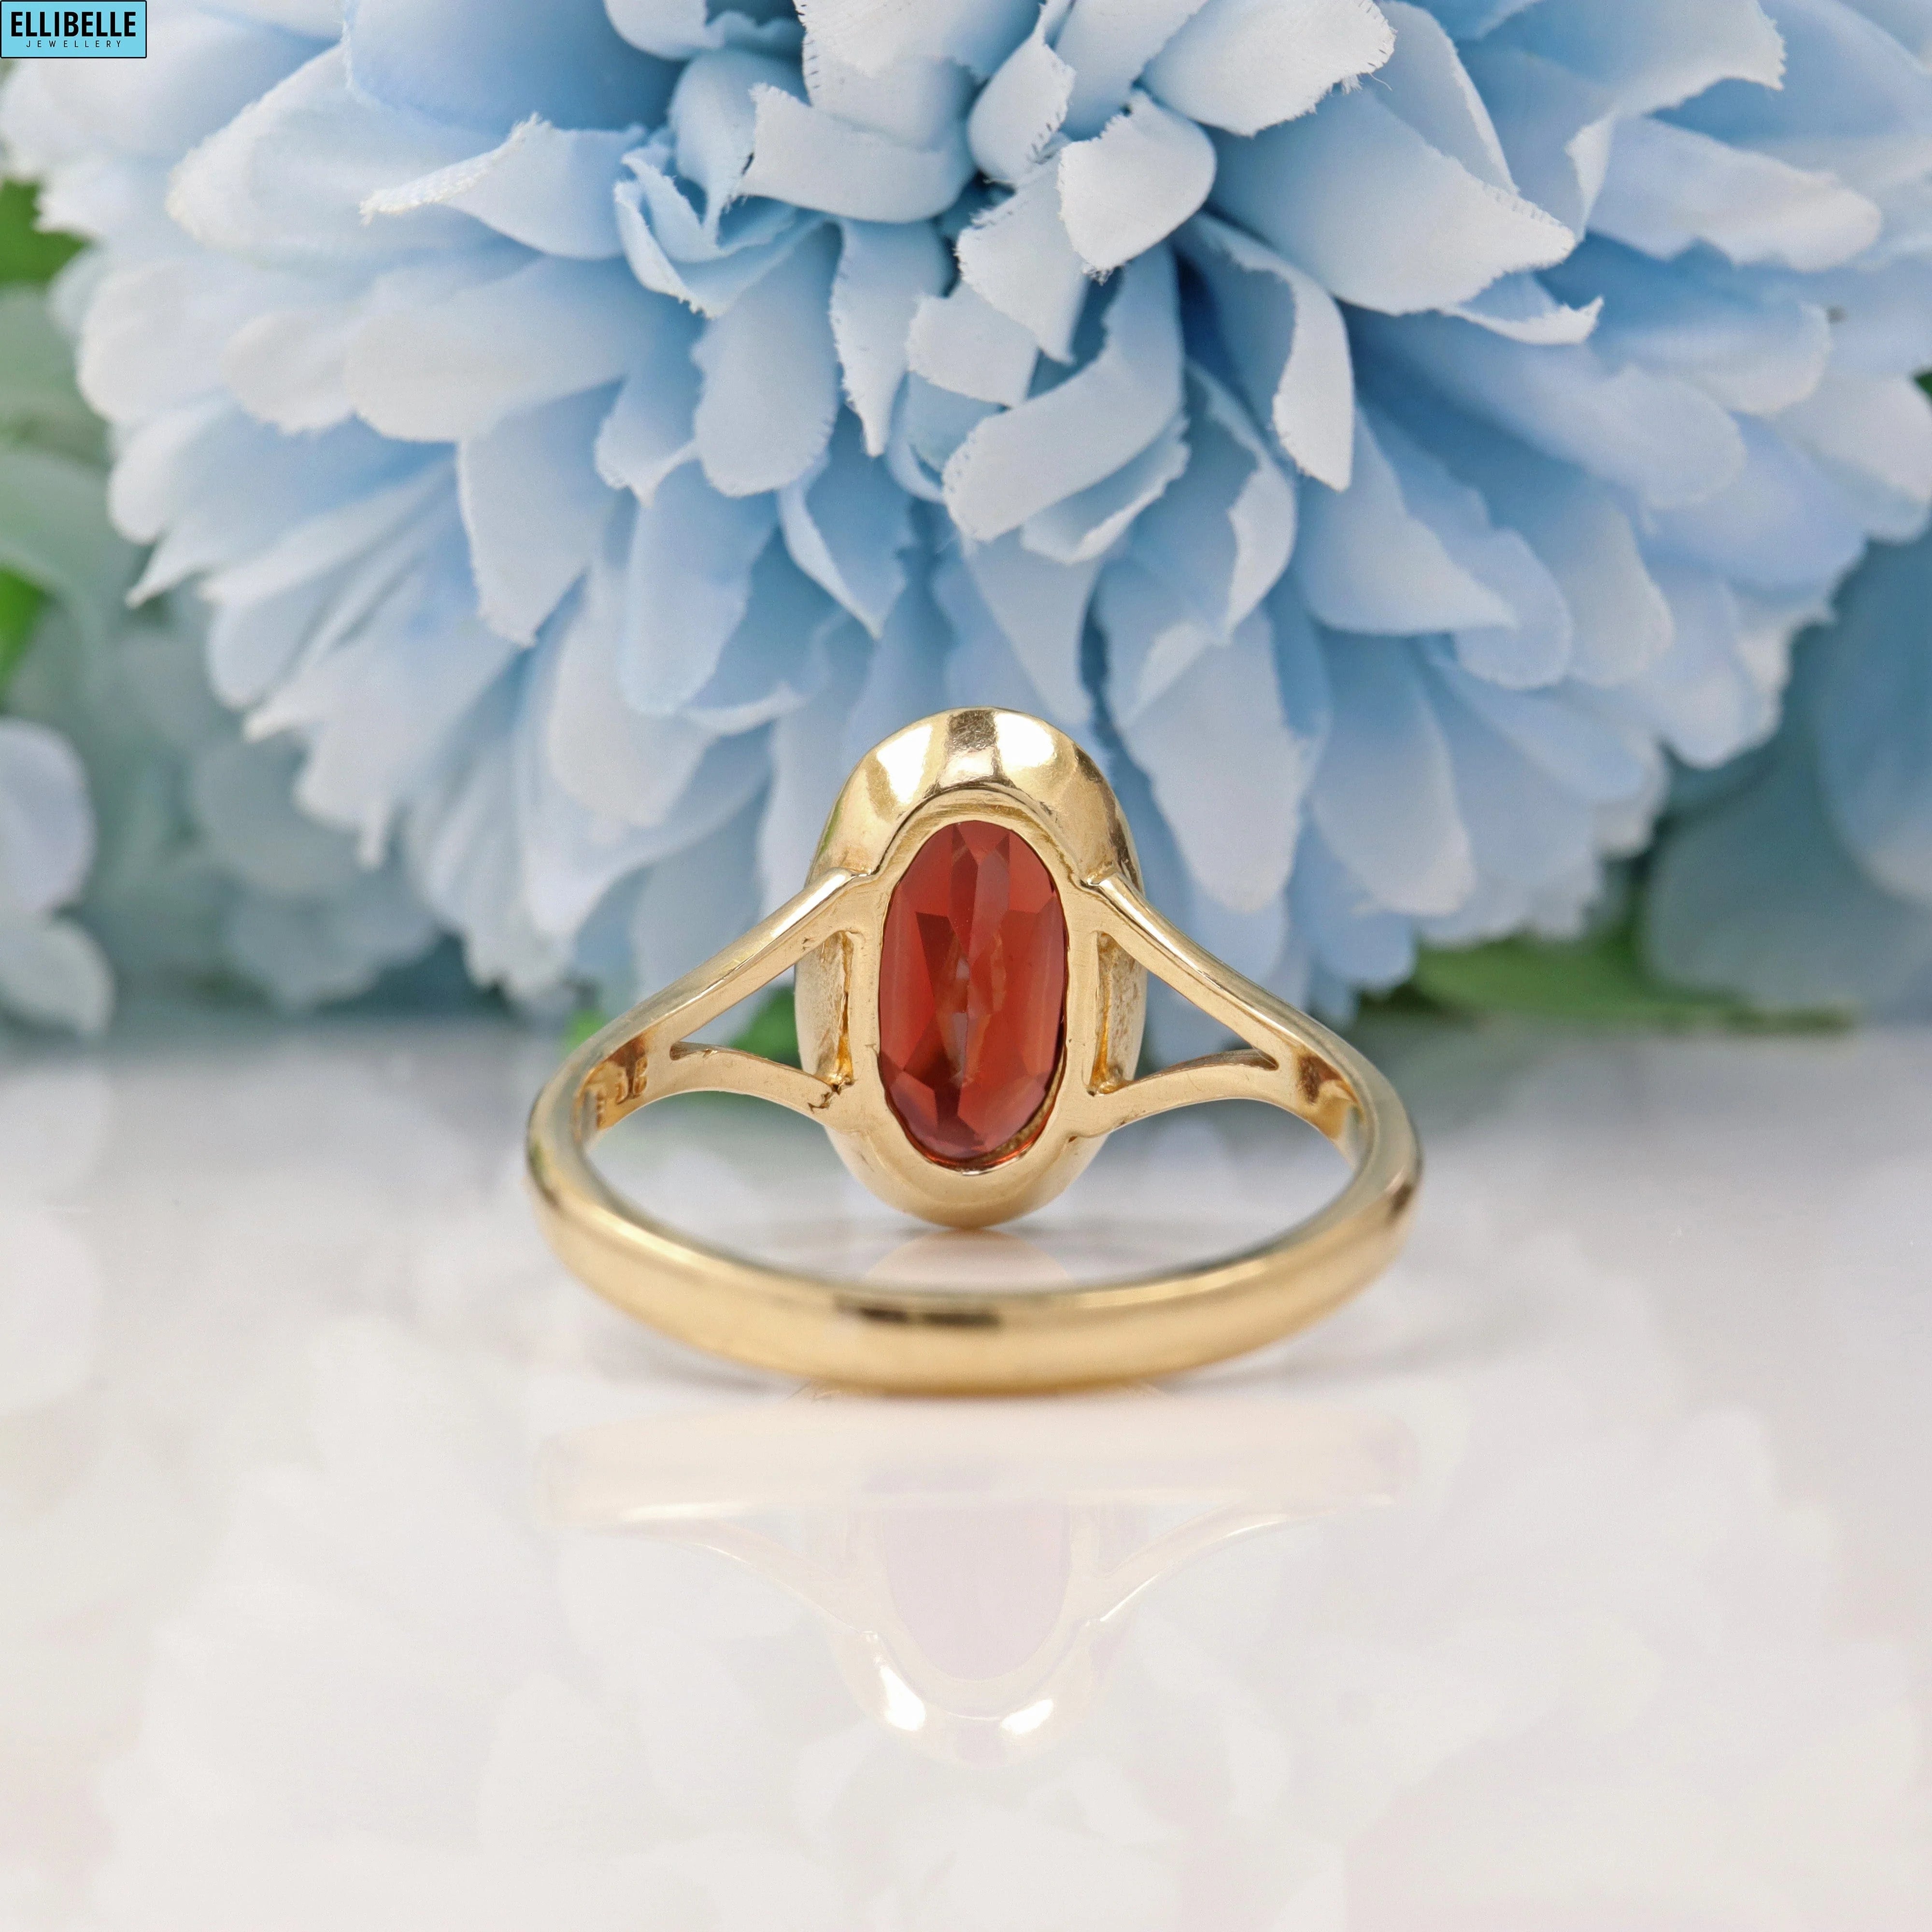 Ellibelle Jewellery EDWARDIAN STYLE GARNET 9CT GOLD SOLITAIRE RING